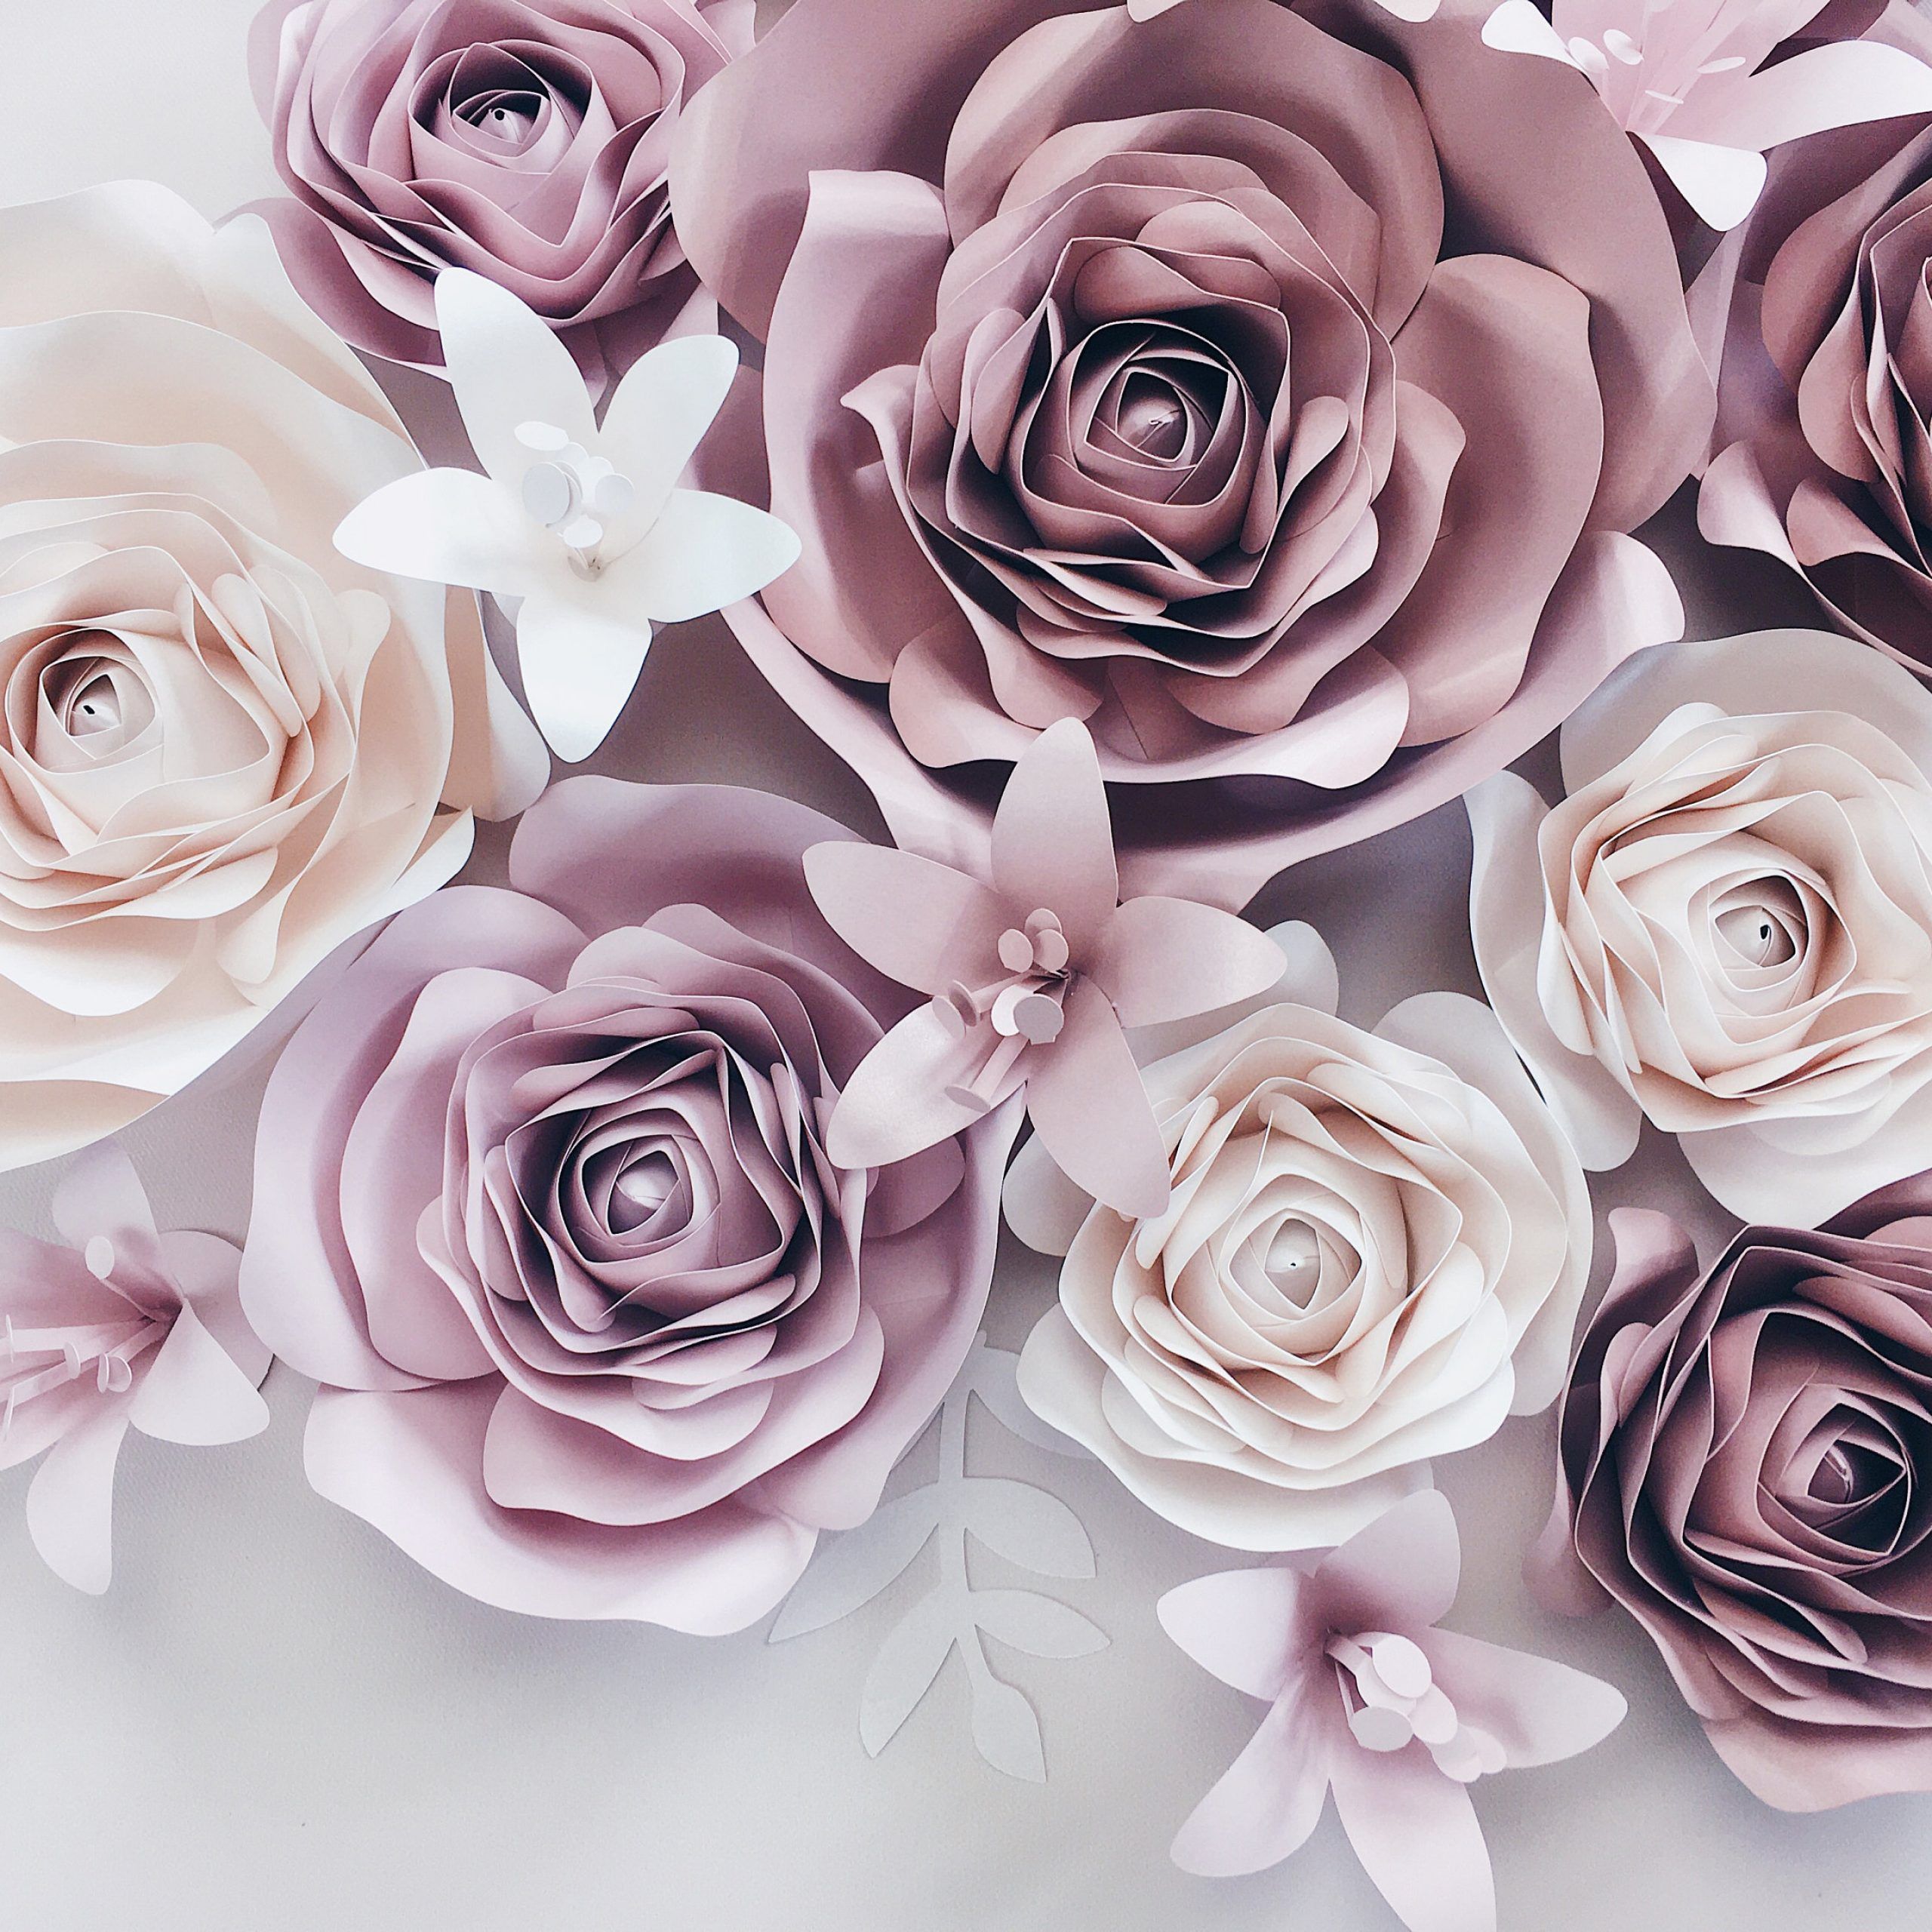 3d Paper Flowers Wall Decor Roses Wall Art Floral Nursery – Etsy In Roses Wall Art (View 11 of 15)